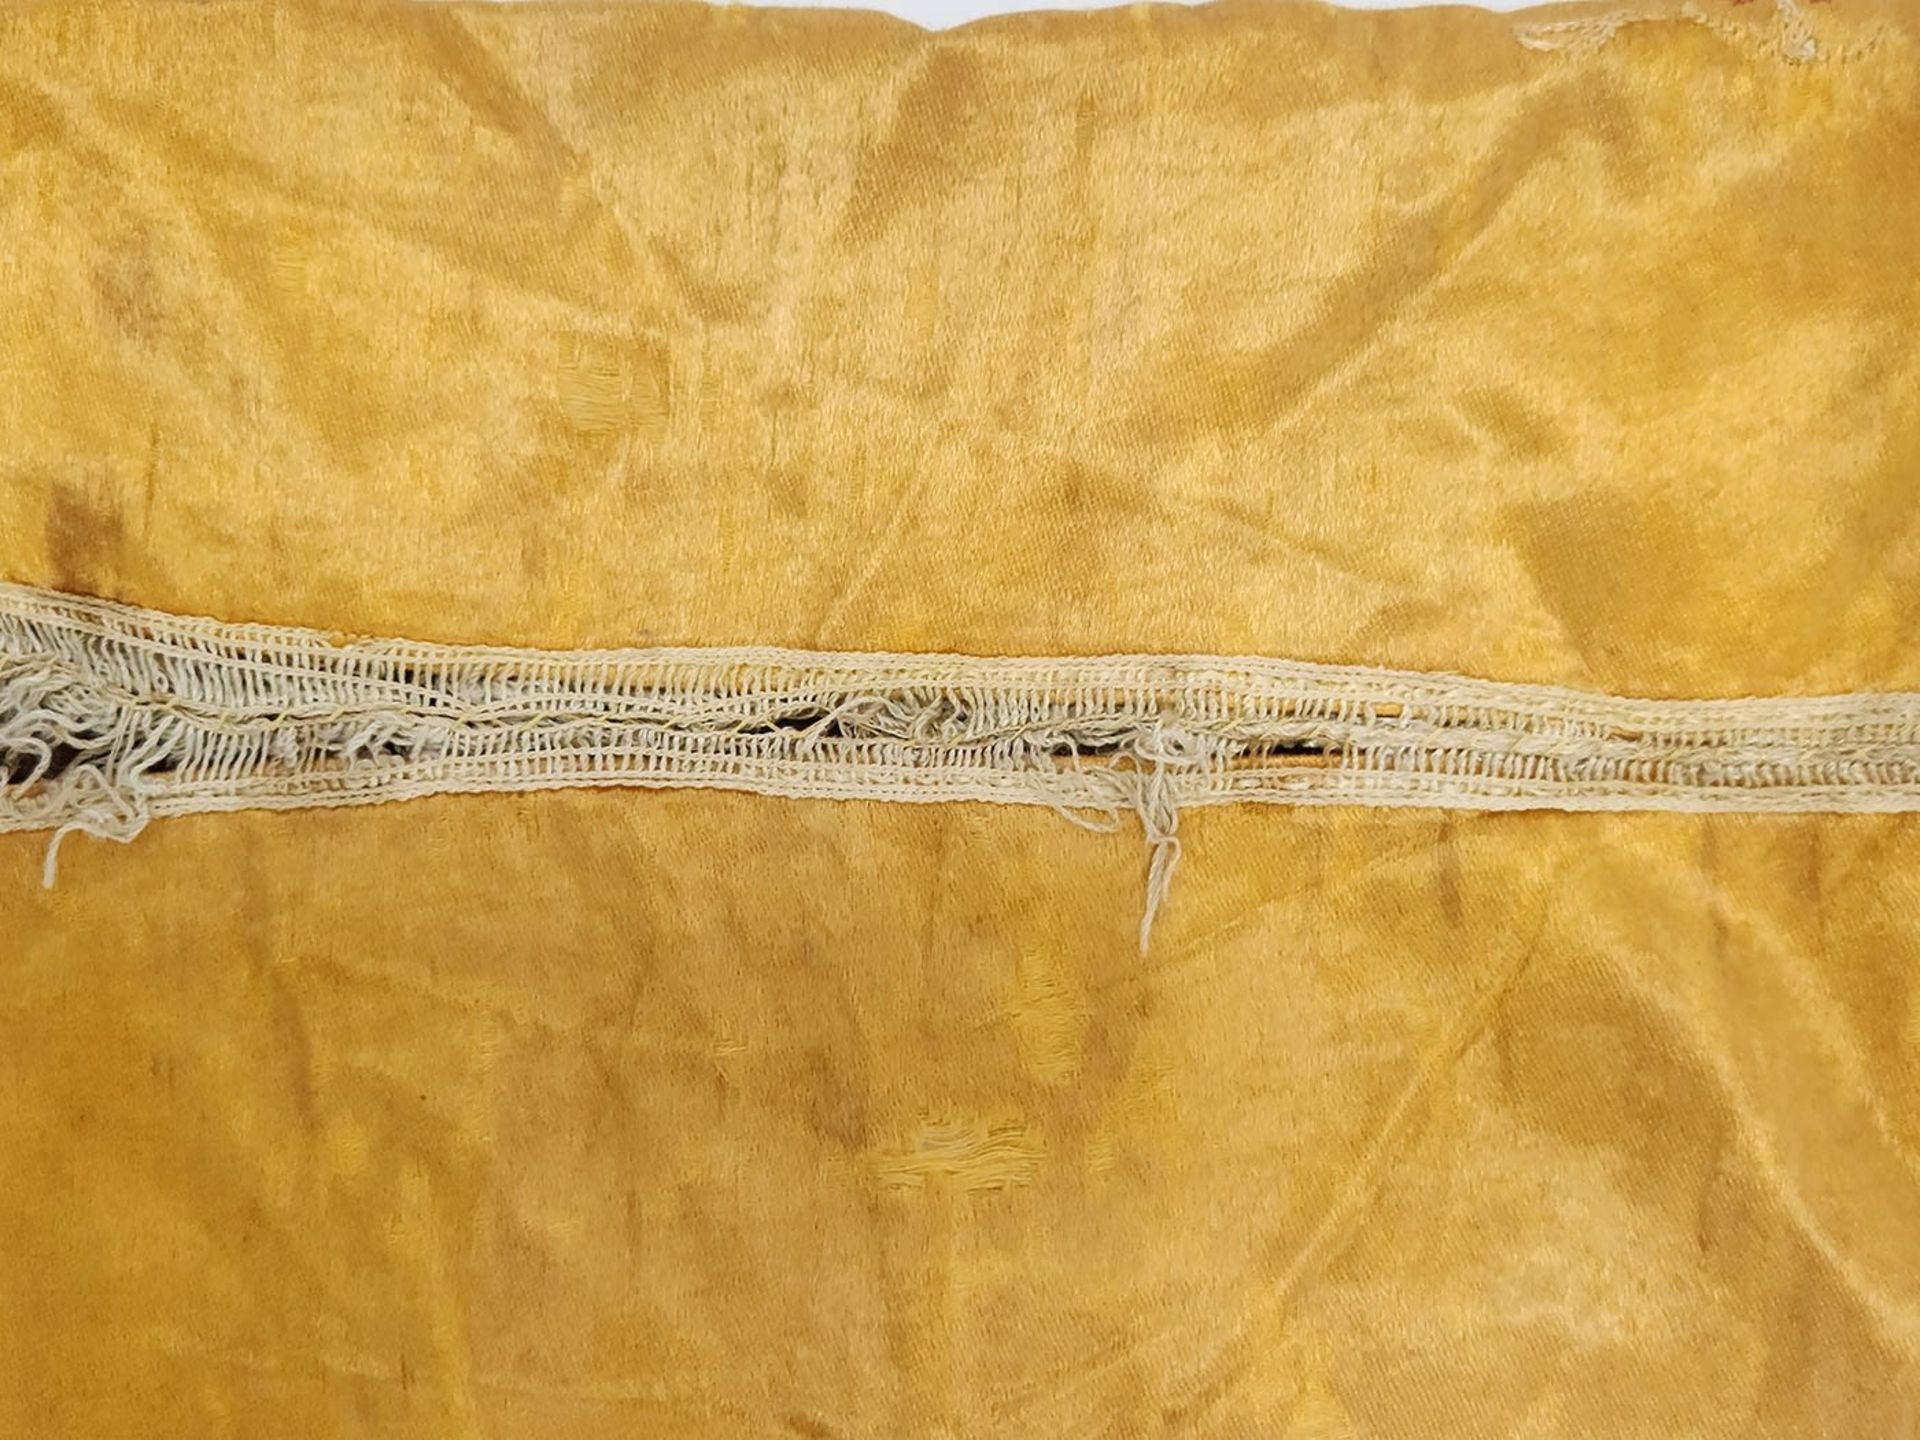 A Torah scroll coat, decorated with cotton threads on yellow silk, with illustrations of menorahs - Image 5 of 6